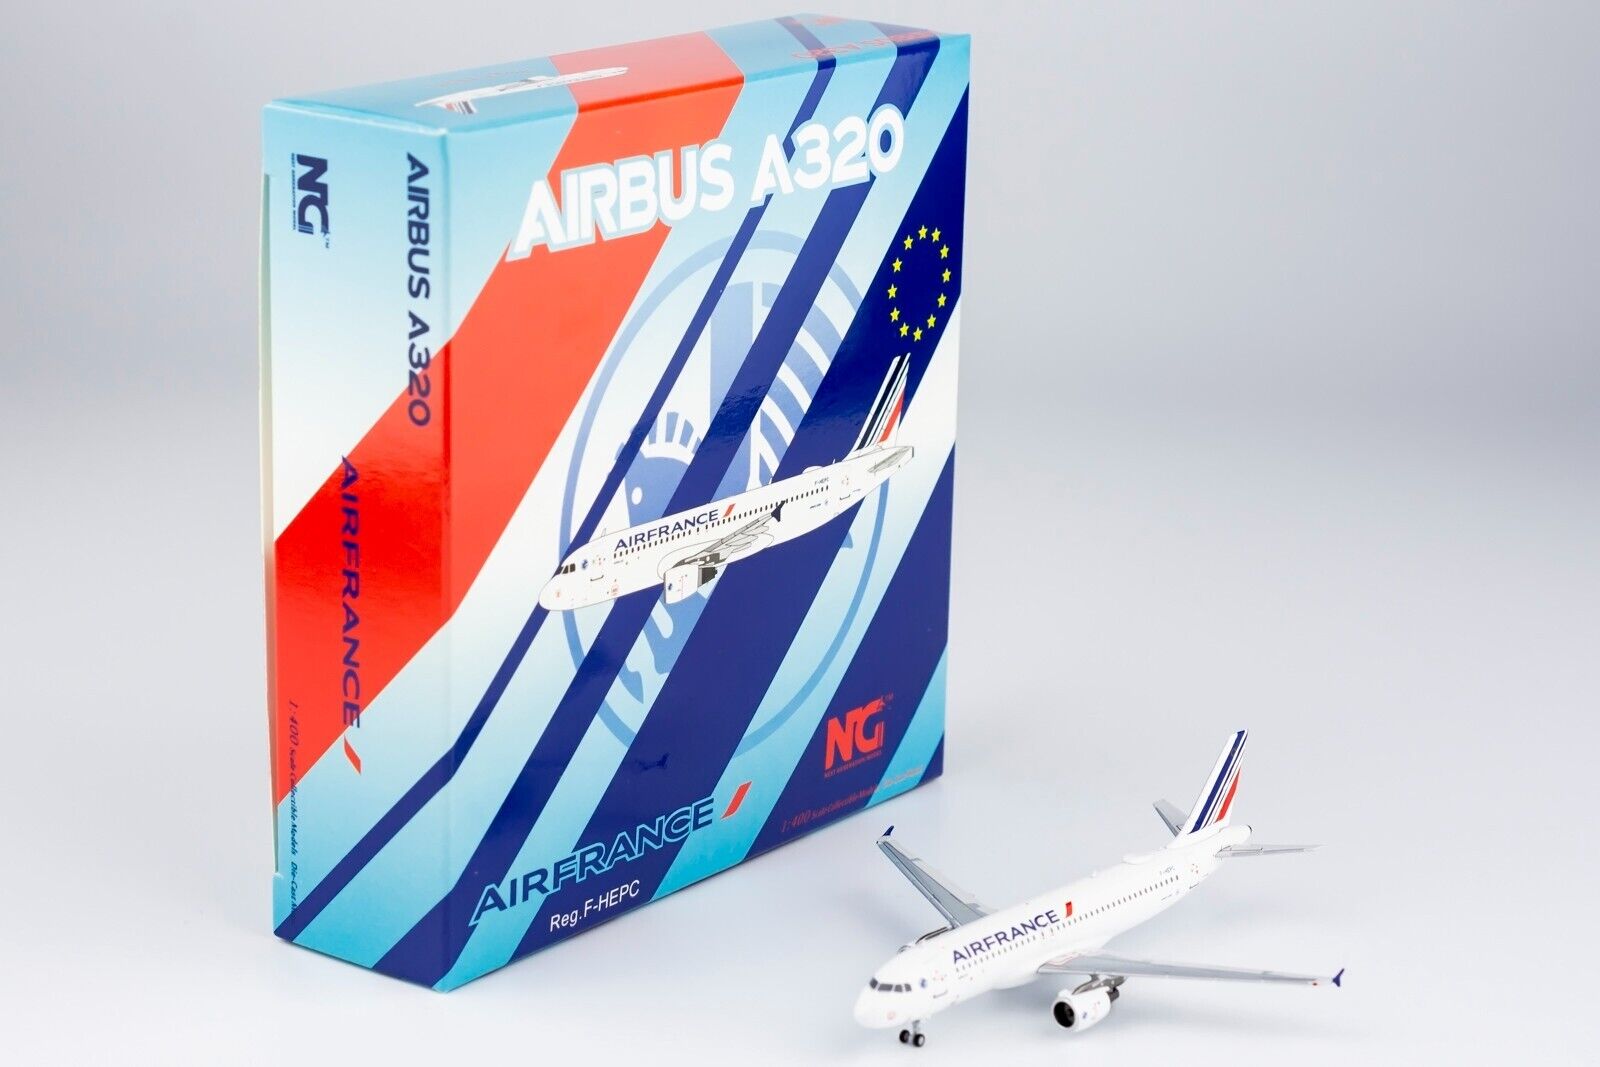 * NEW * AIR FRANCE A320-200 Reg: F-HEPC NG MODEL 15003 1:400 Scale Diecast Model